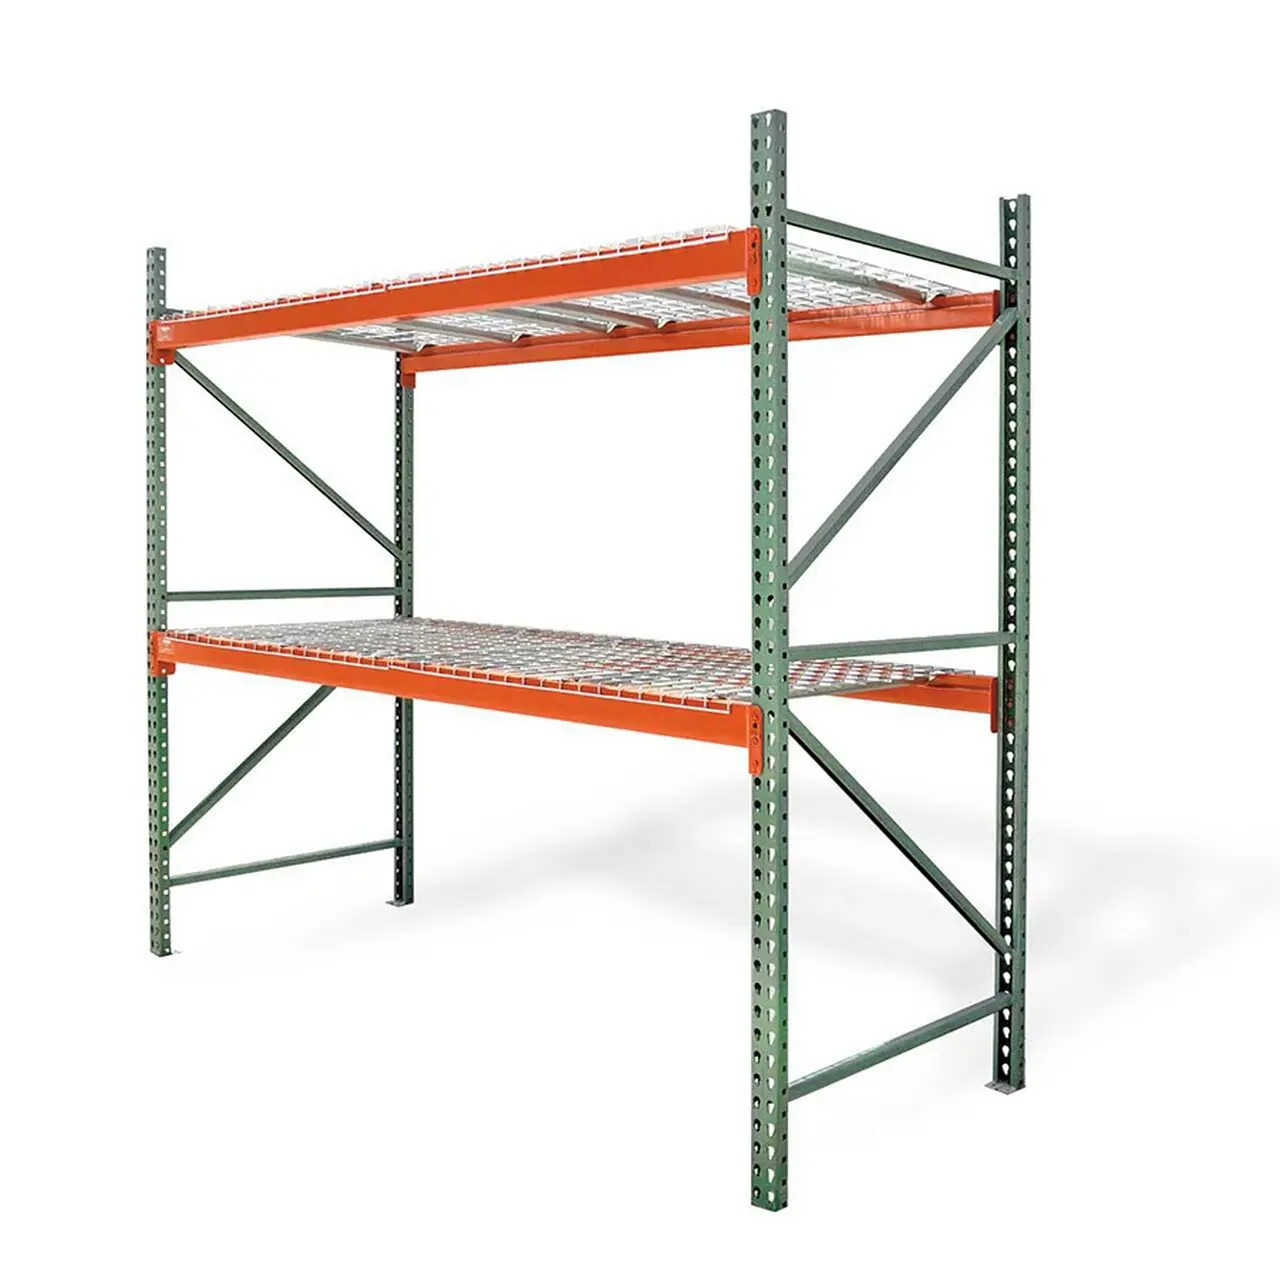 Good Quality Heavy Duty Selective Galvanized Steel Shelf Warehouse Stacking Pallet Racking System